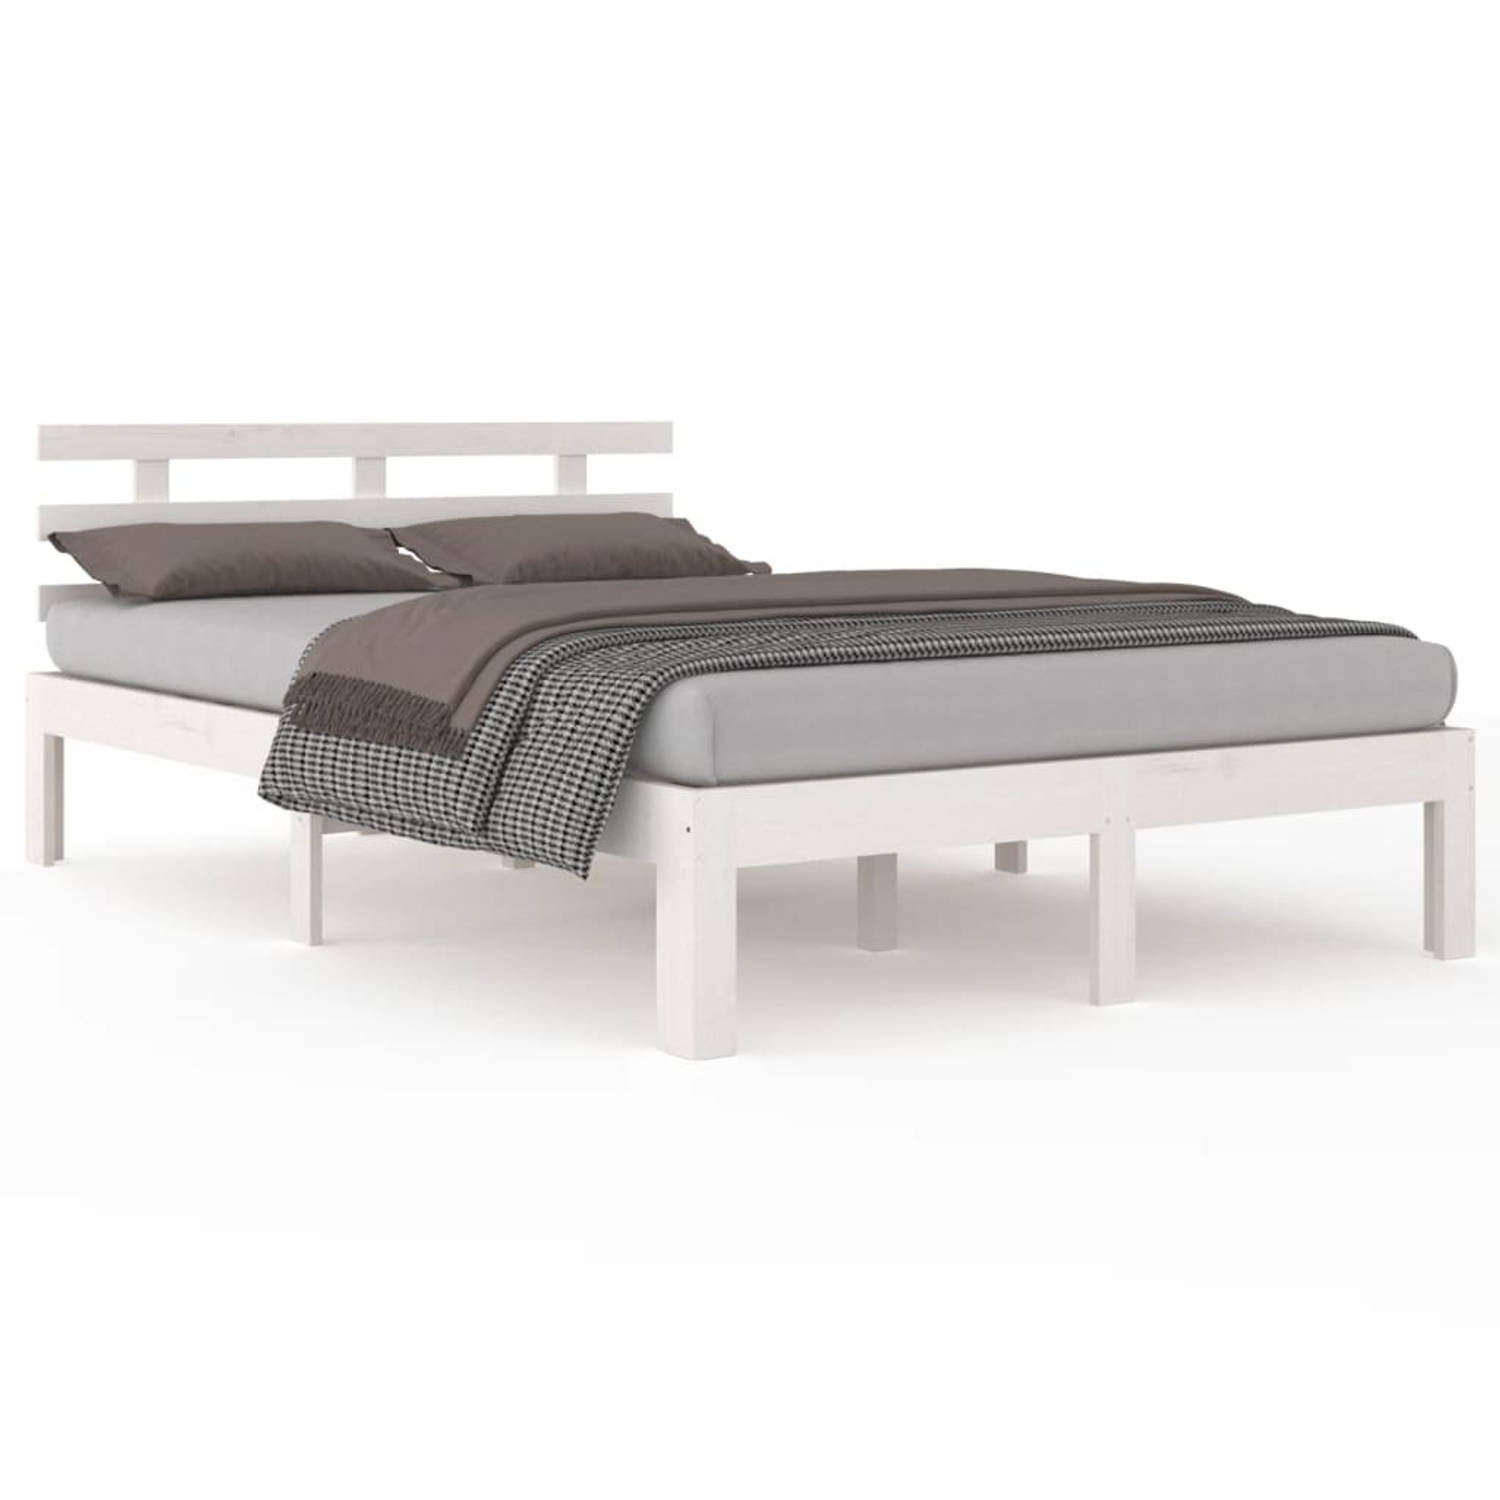 The Living Store Bedframe massief hout wit 150x200 cm 5FT King Size - Bedframe - Bedframes - Bed - Bedbodem - Ledikant - Bed Frame - Massief Houten Bedframe - Slaapmeubel - Tweeper